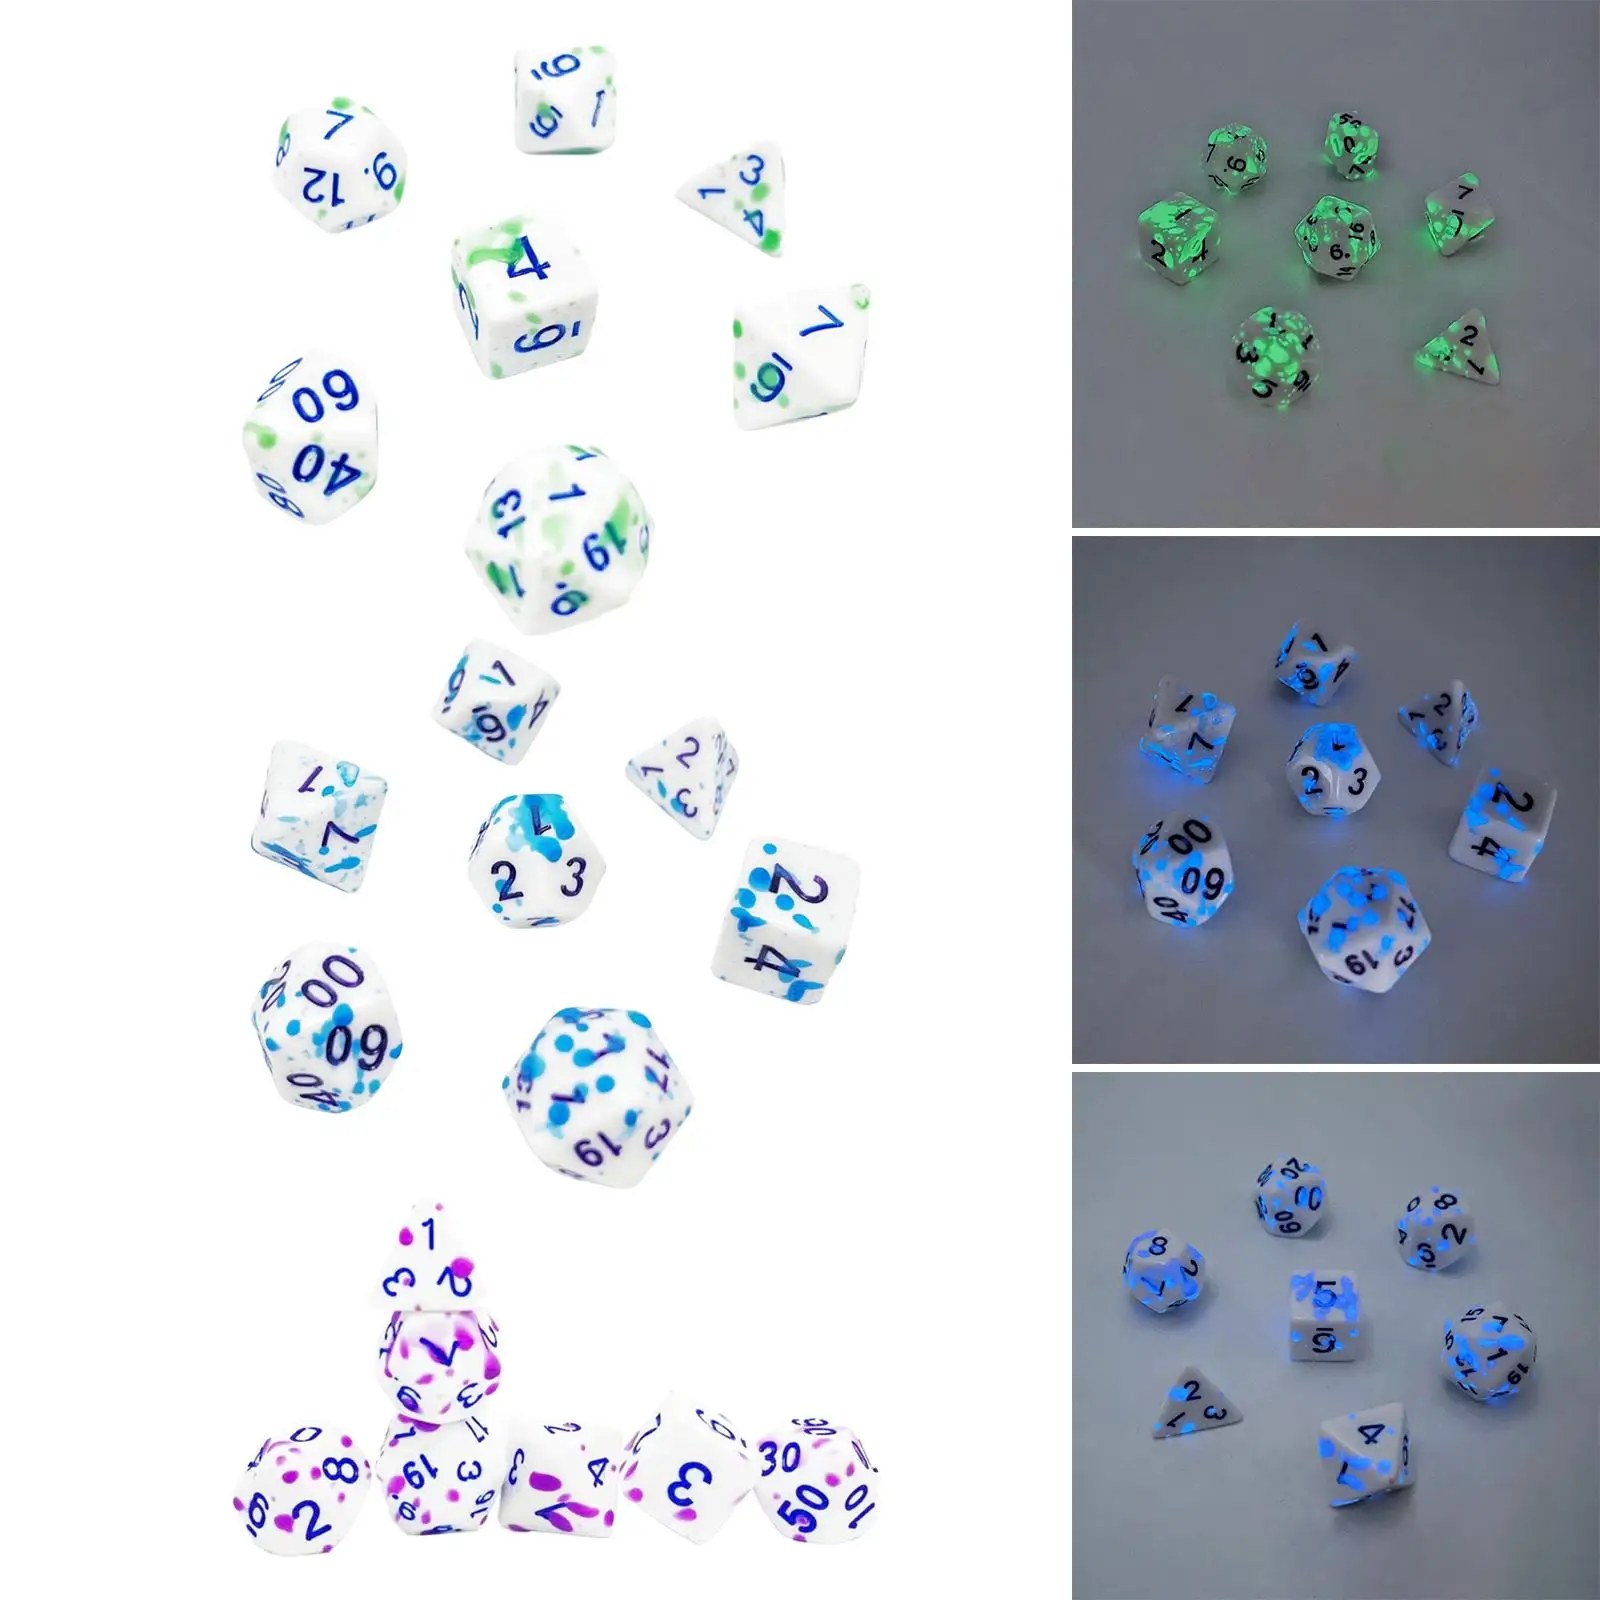 7x Color Changing Dice, Polyhedral Dice, Party Toy Gift, Board Game, Handmade,